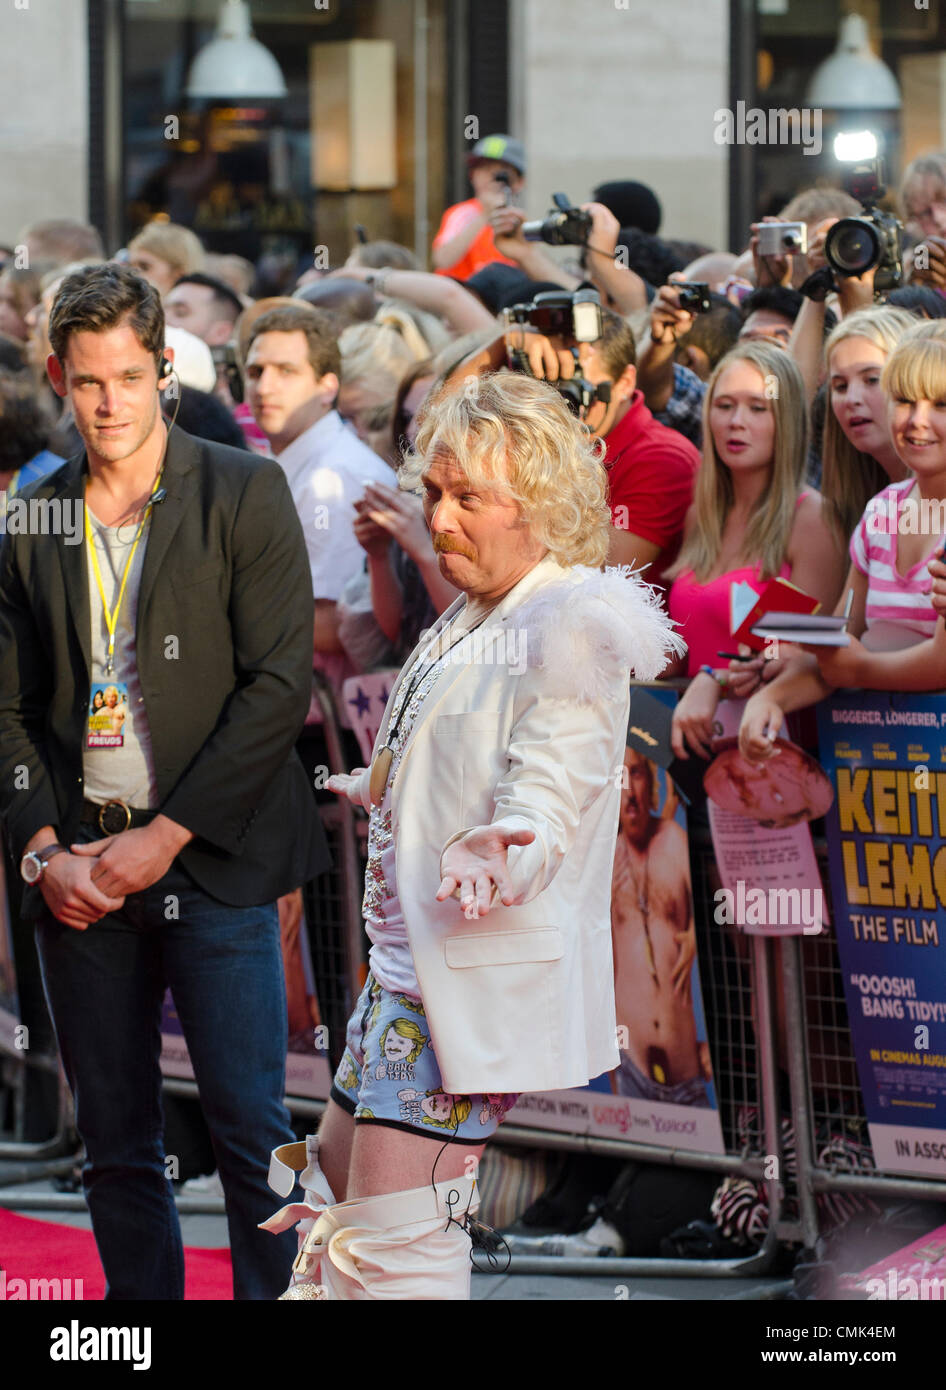 Leigh Francis als Keith Lemon mit heruntergelassener "Keith Lemon", Leigh Franics an Keith Lemon Hose der Film Premiere Odeon Leicester Square in London Uk Montag, 20. August 2012. Stockfoto